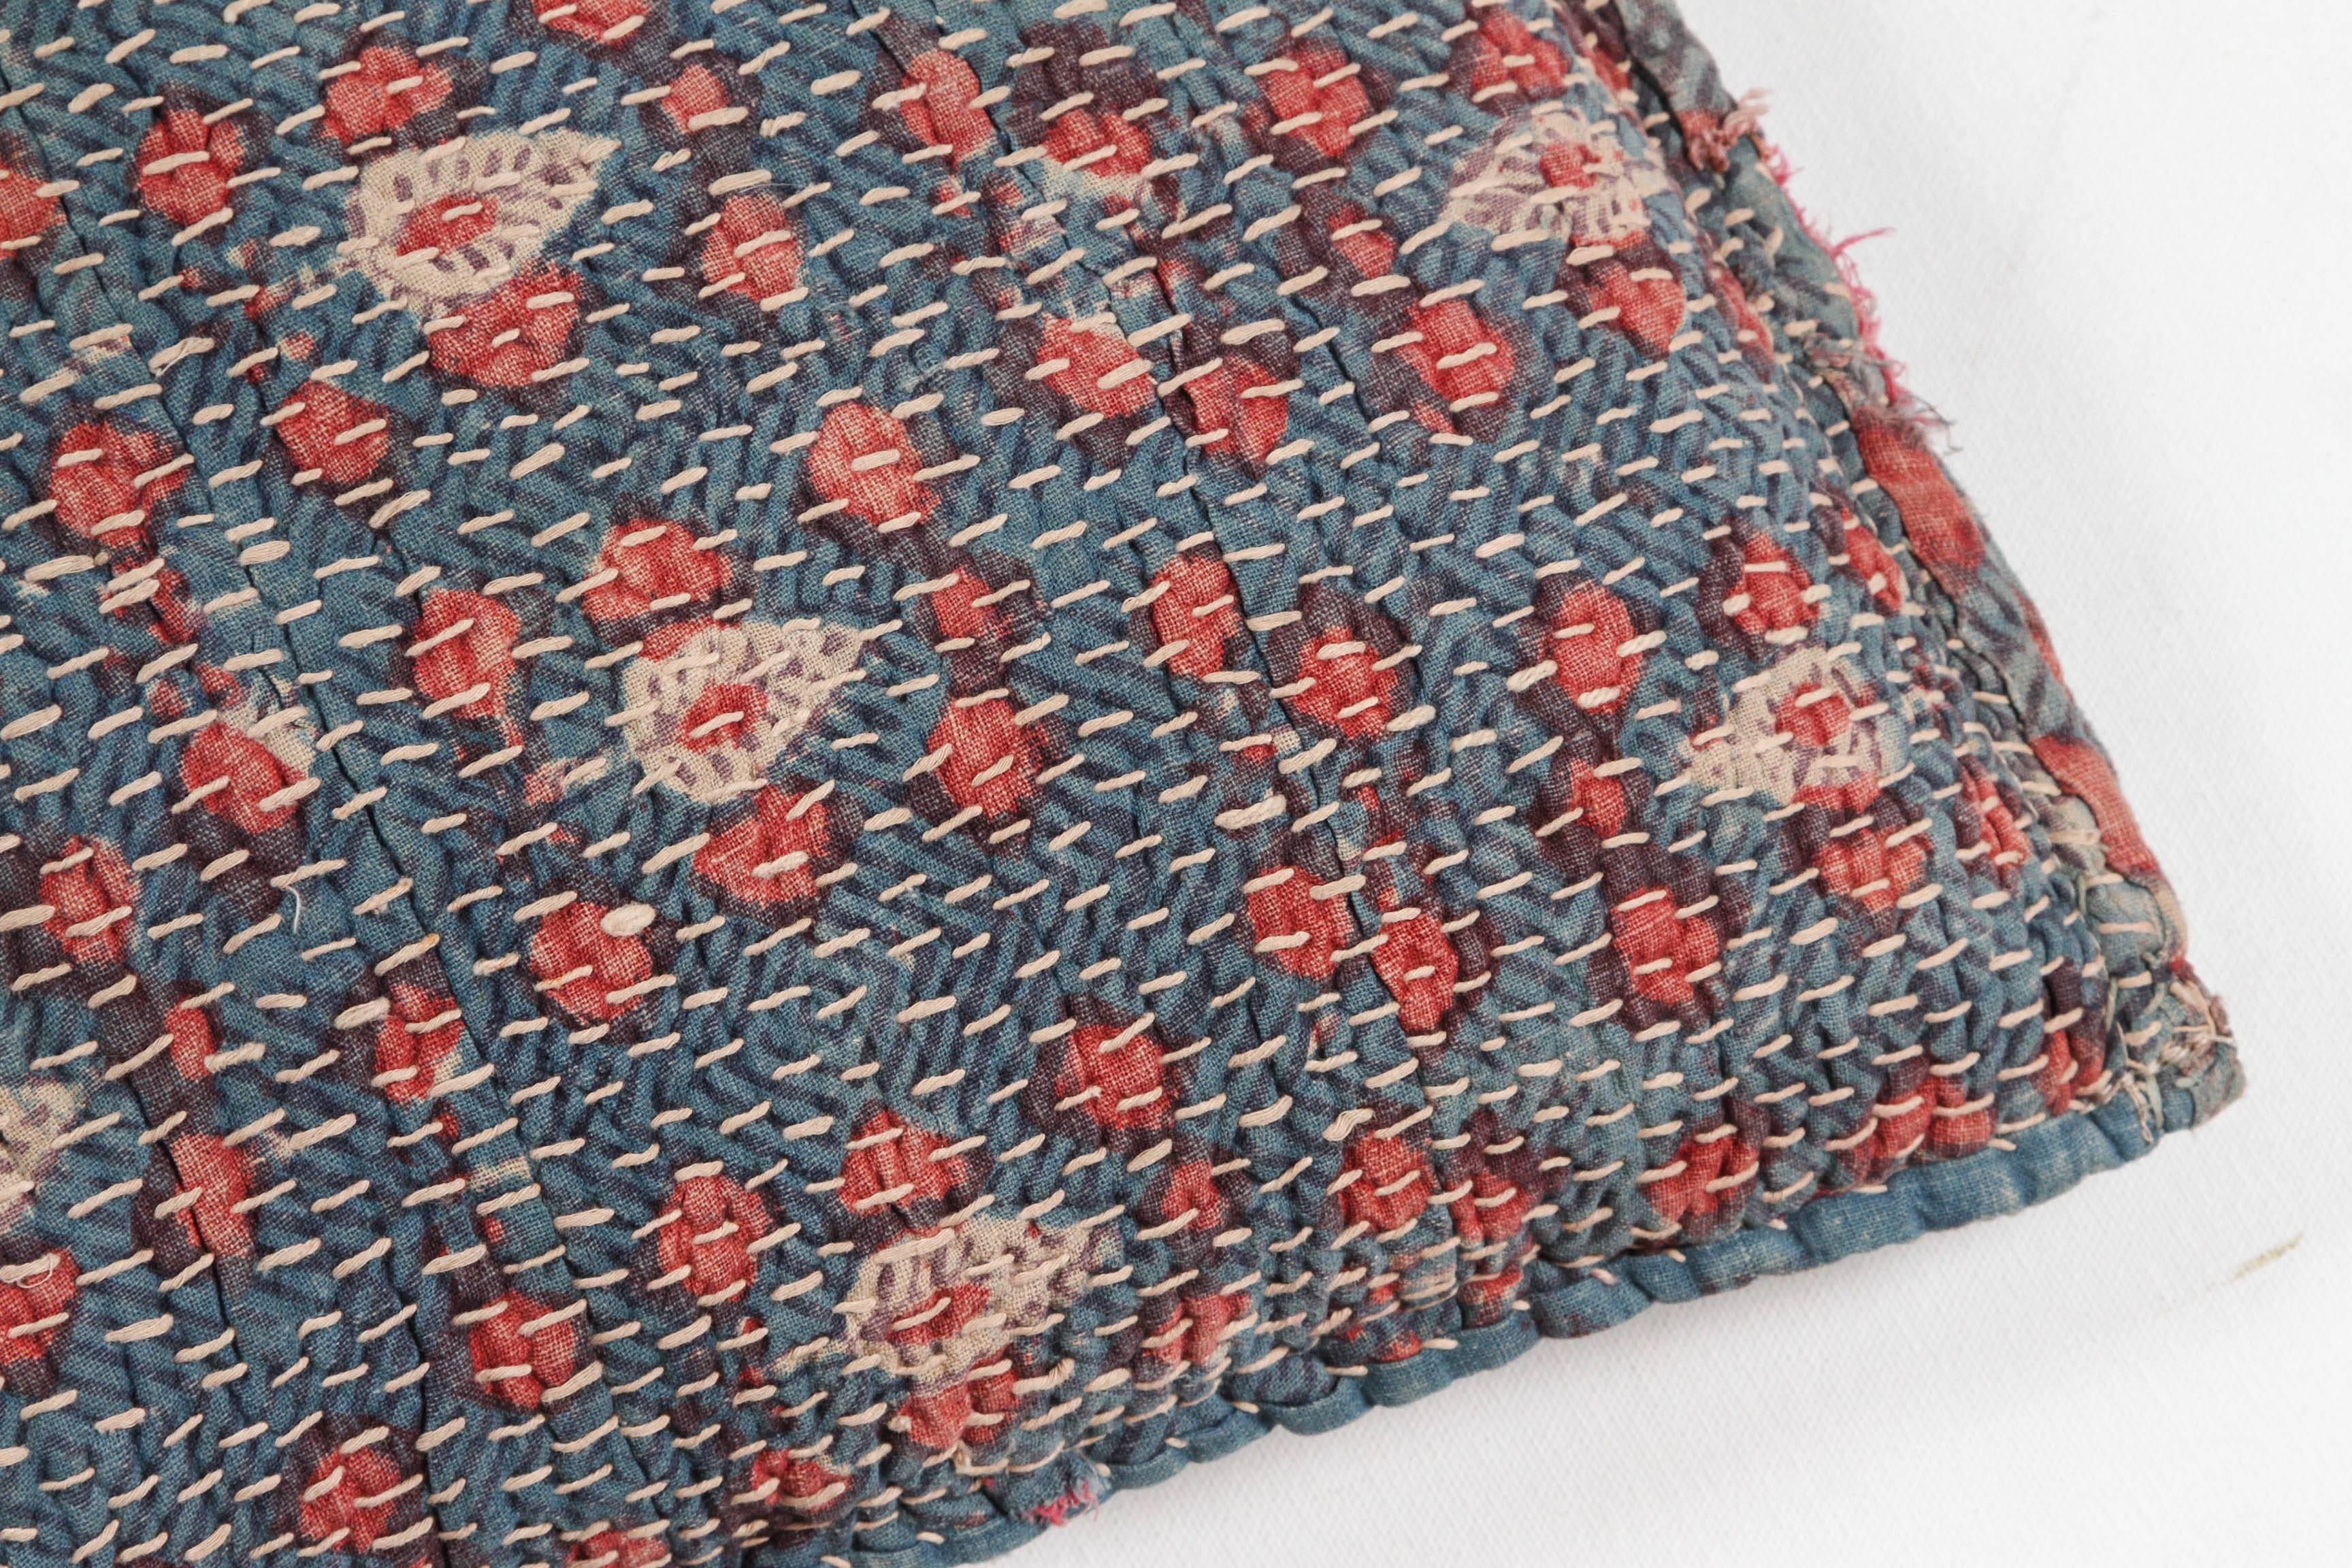 Indian Banjara Overstitch Pillow, Aqua Blue, Red, White Quilted Cotton